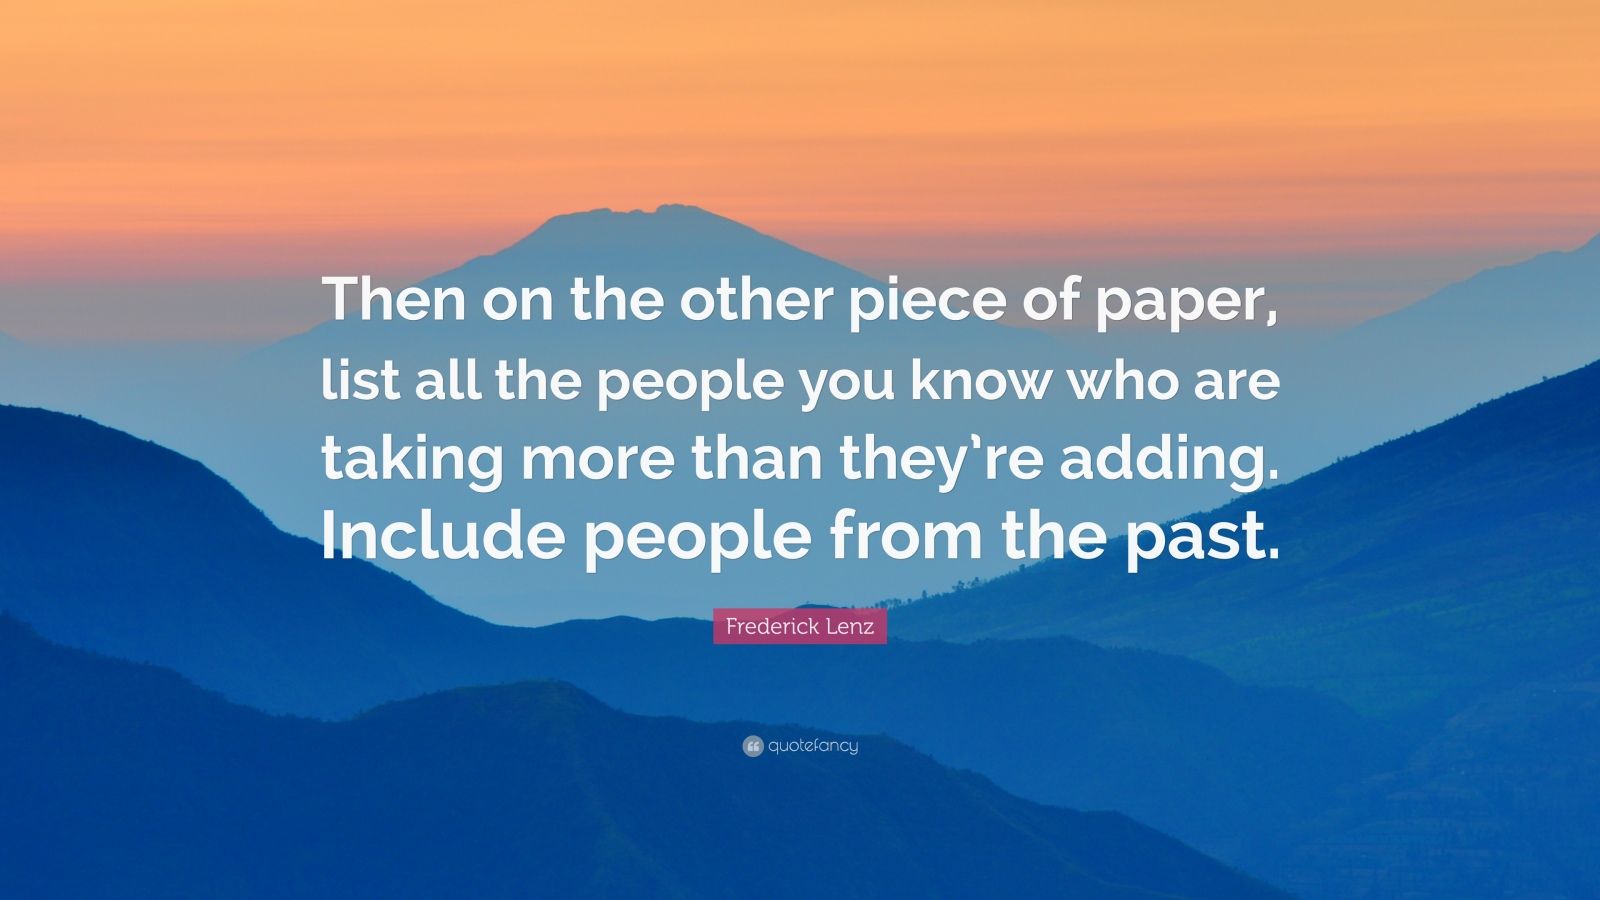 Frederick Lenz Quote: “Take out two pieces of paper. One piece of paper,  list all the